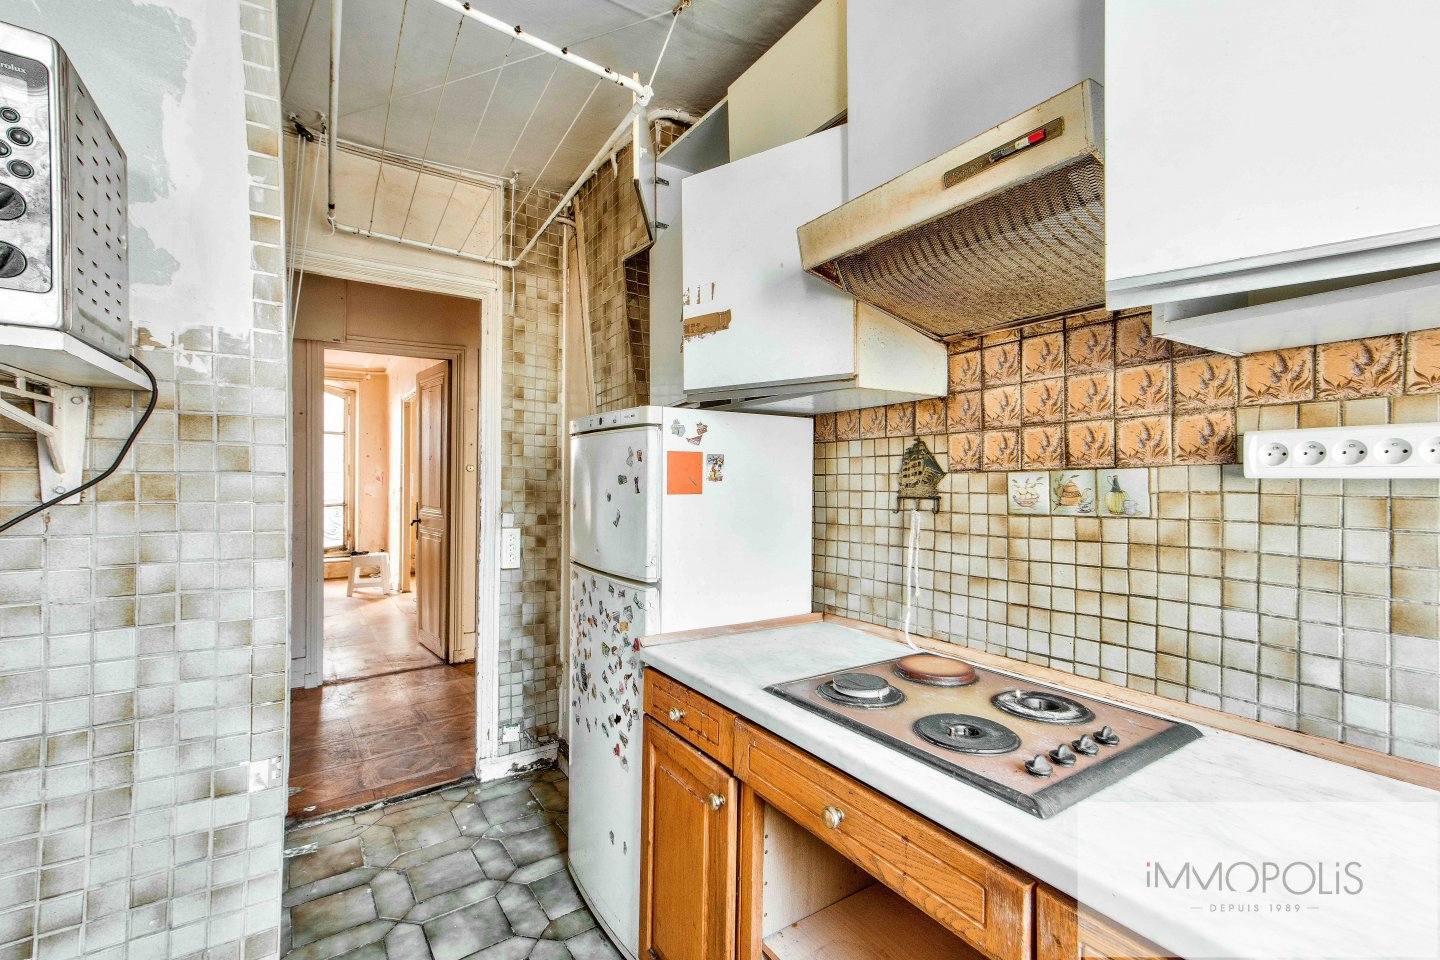 Apartment to be renovated in the heart of the abbesses. 12